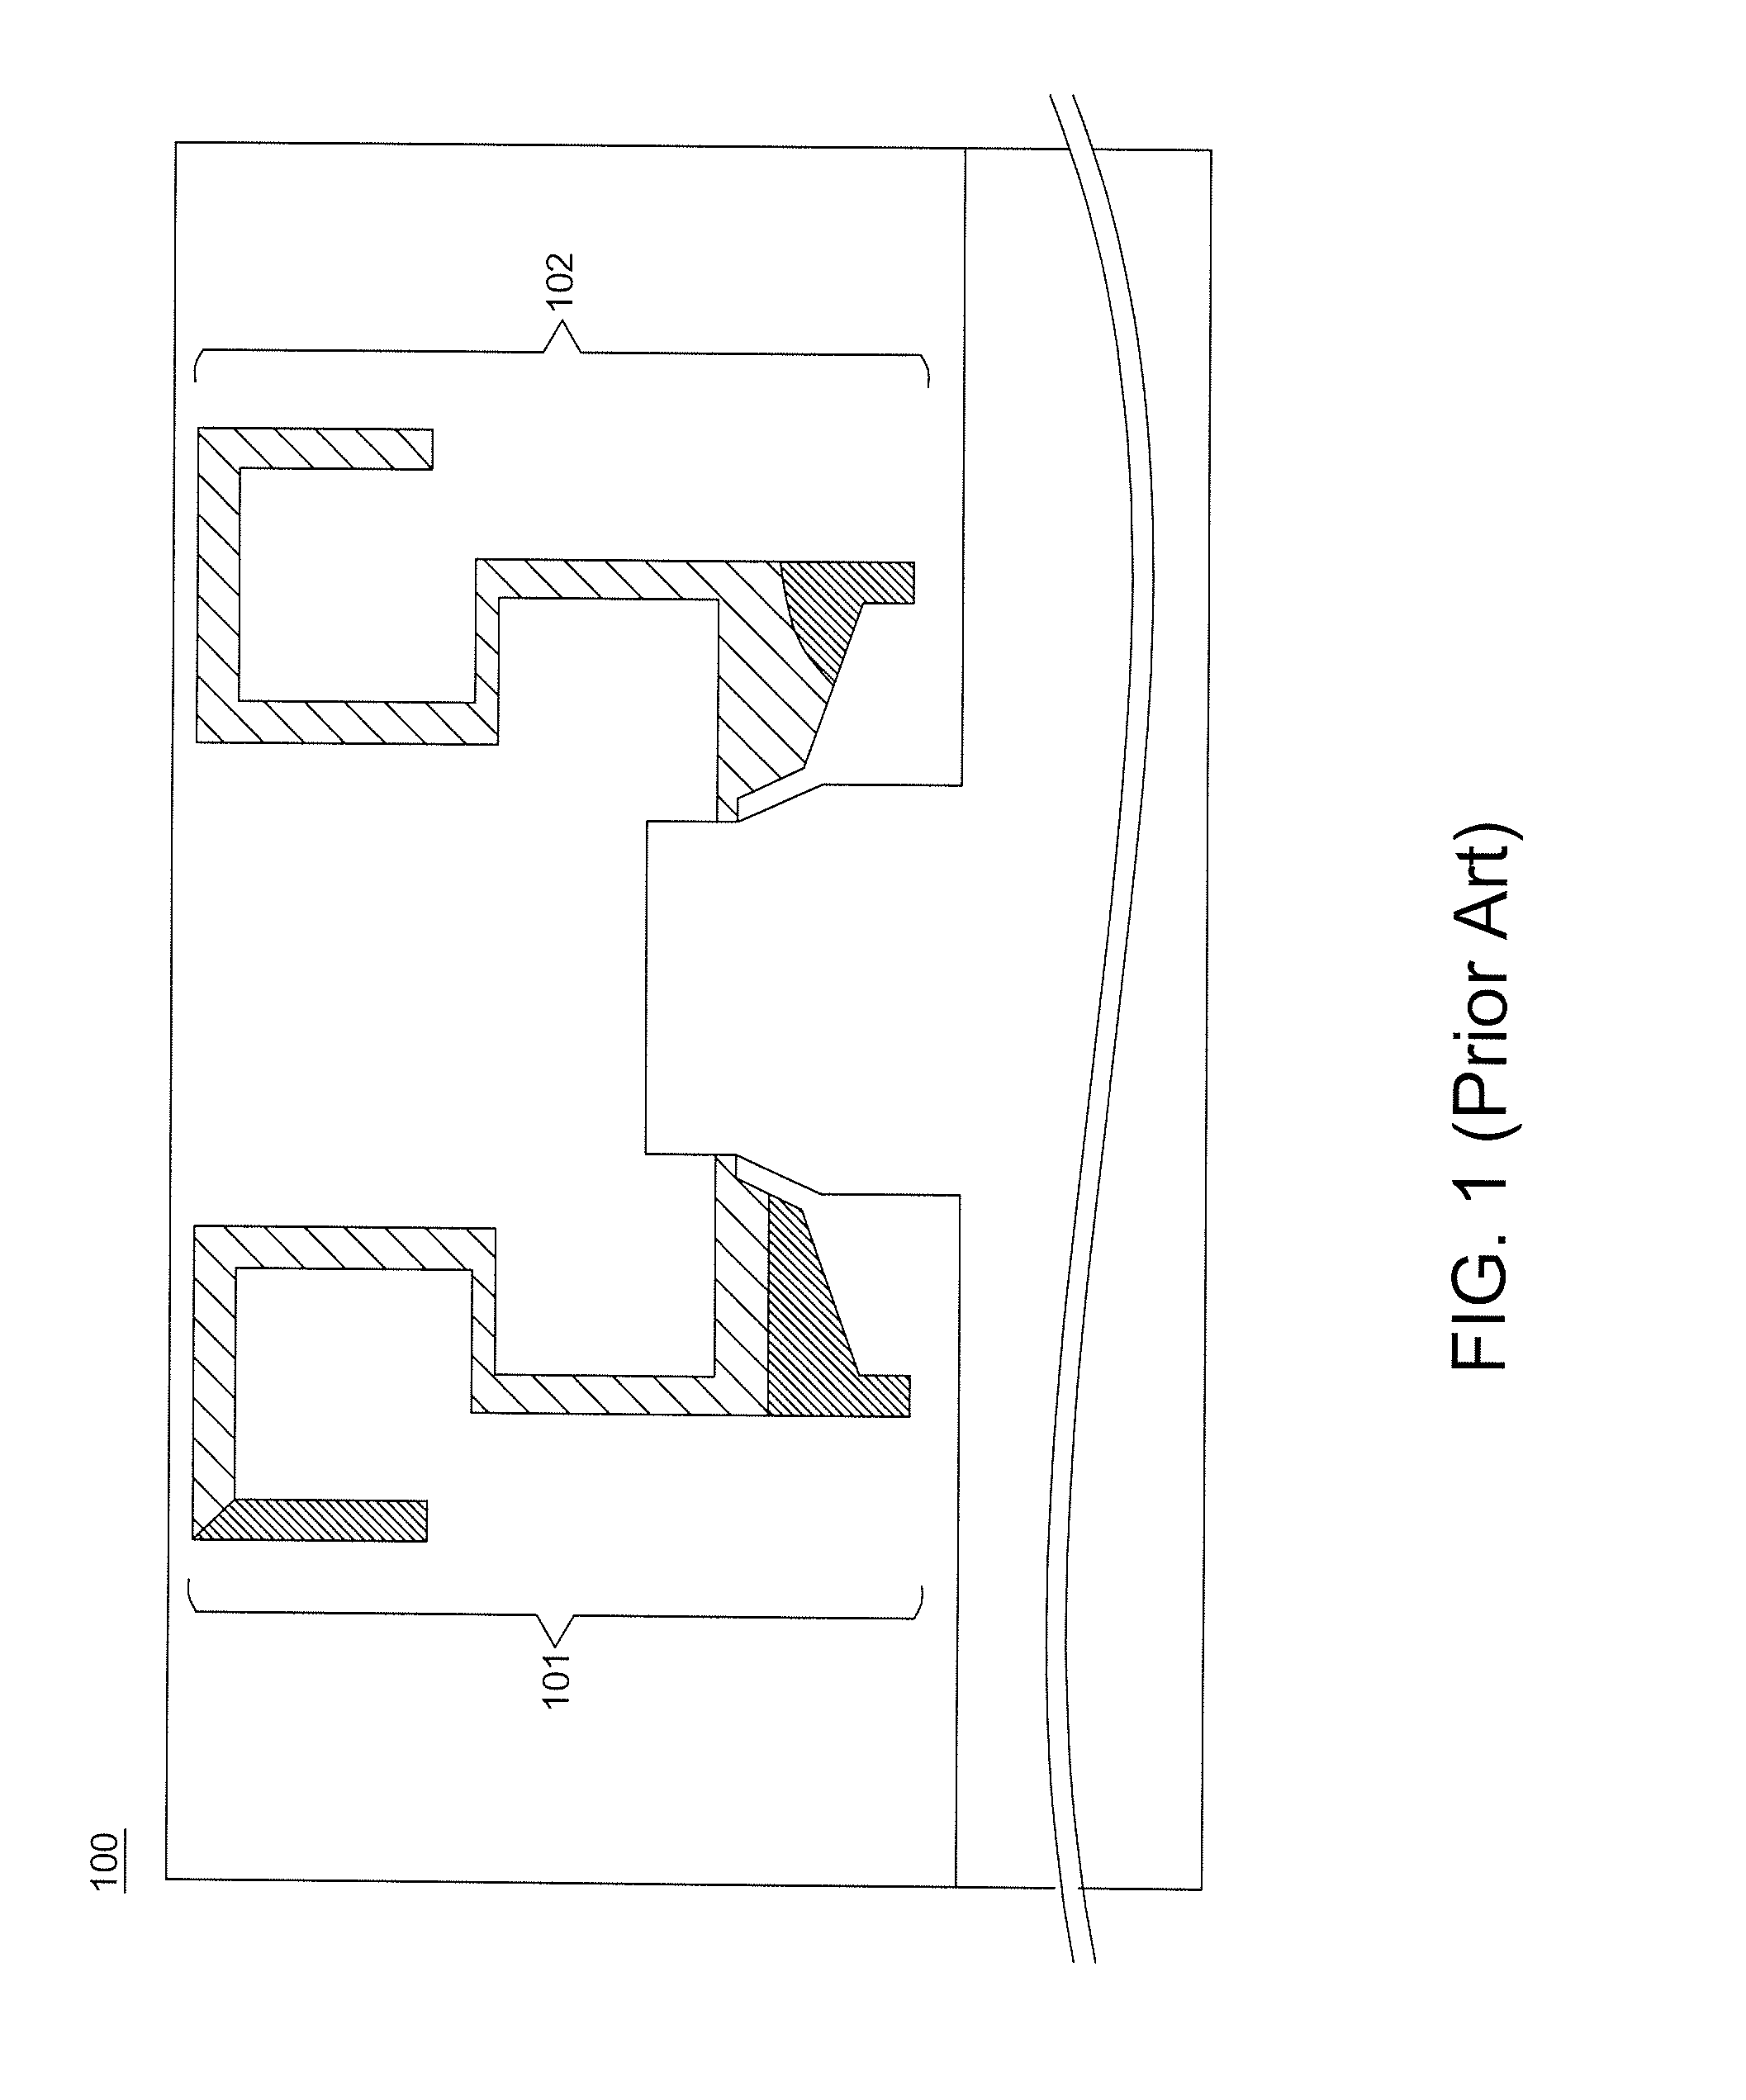 Dualband  antenna  with  isolation  enhanced and method  thereof